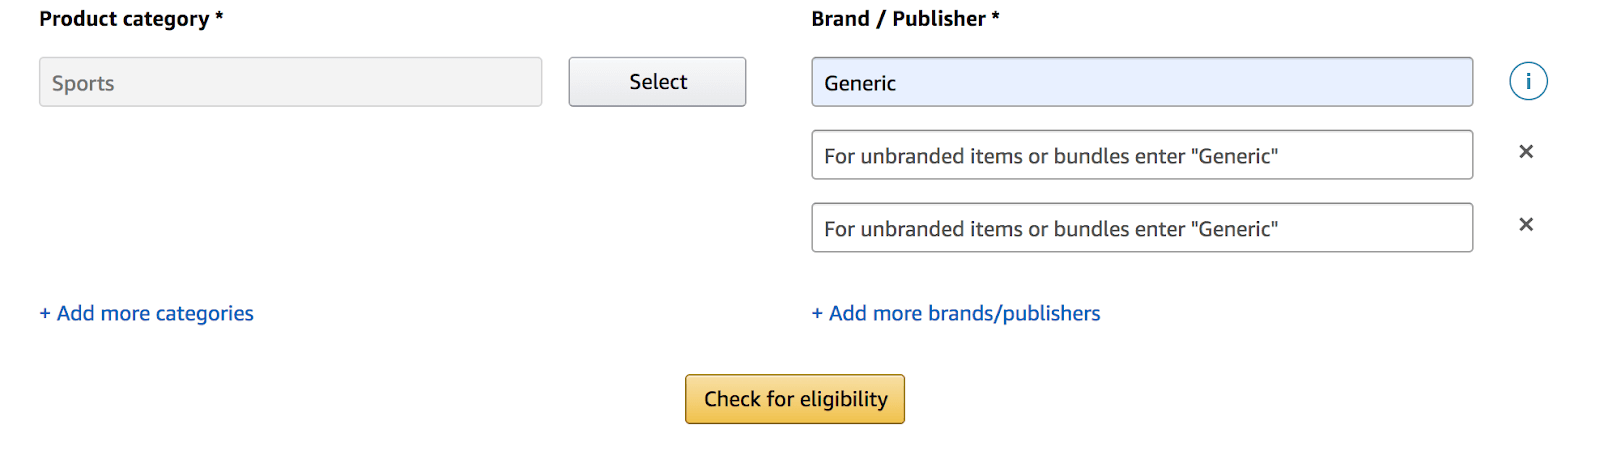 Amazon GTIN exemption: product category options